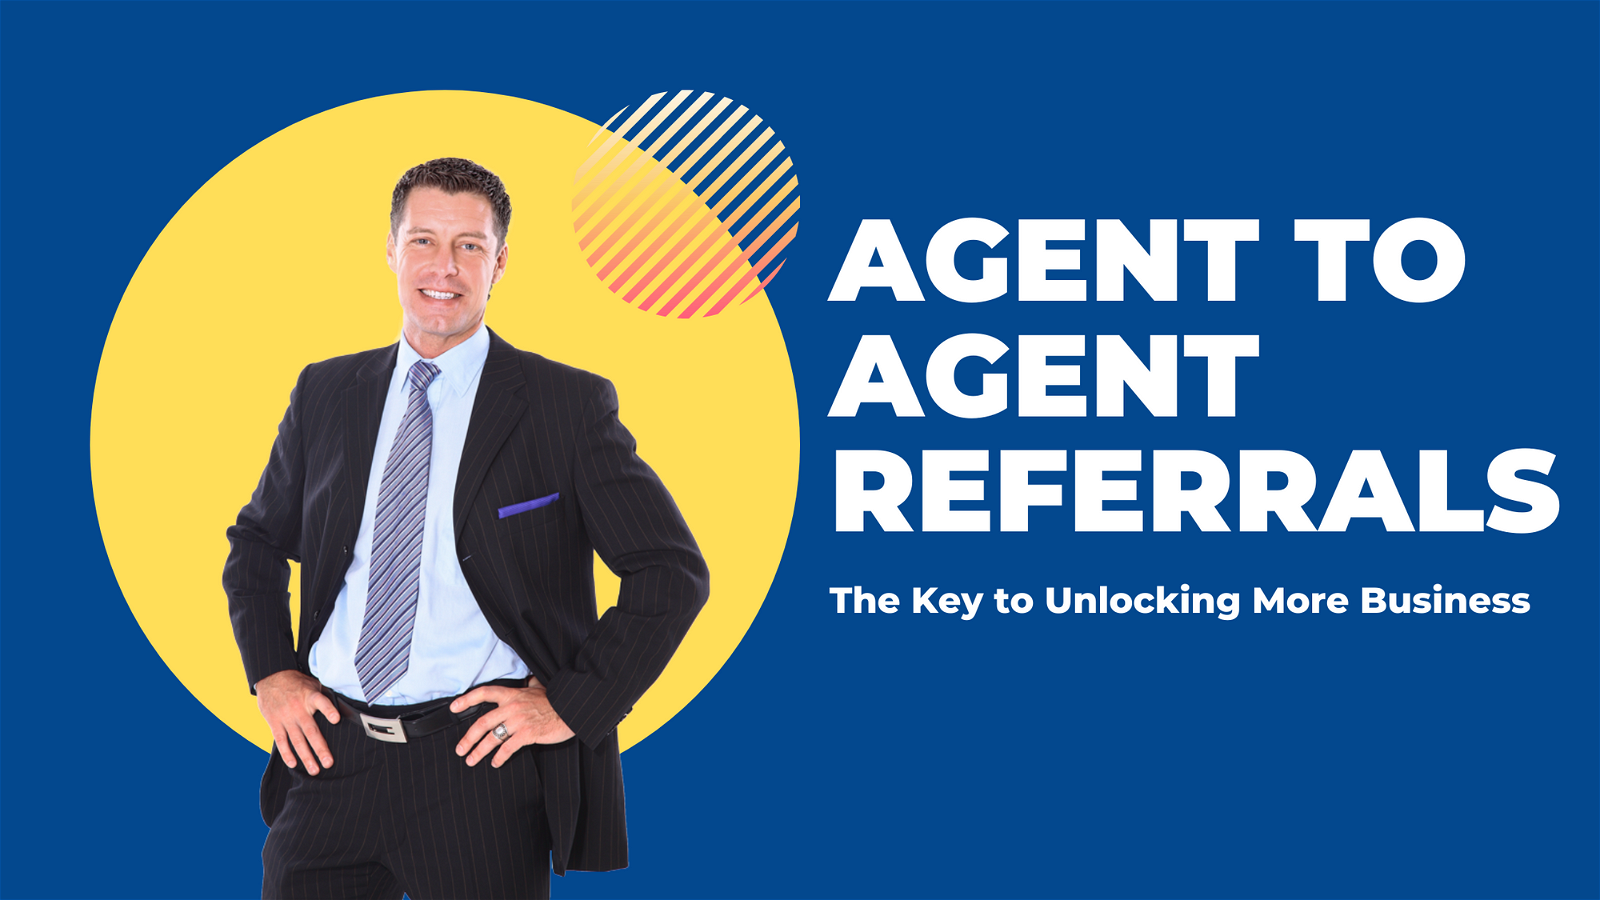 Agent to Agent Referrals: The Key to Unlocking More Business